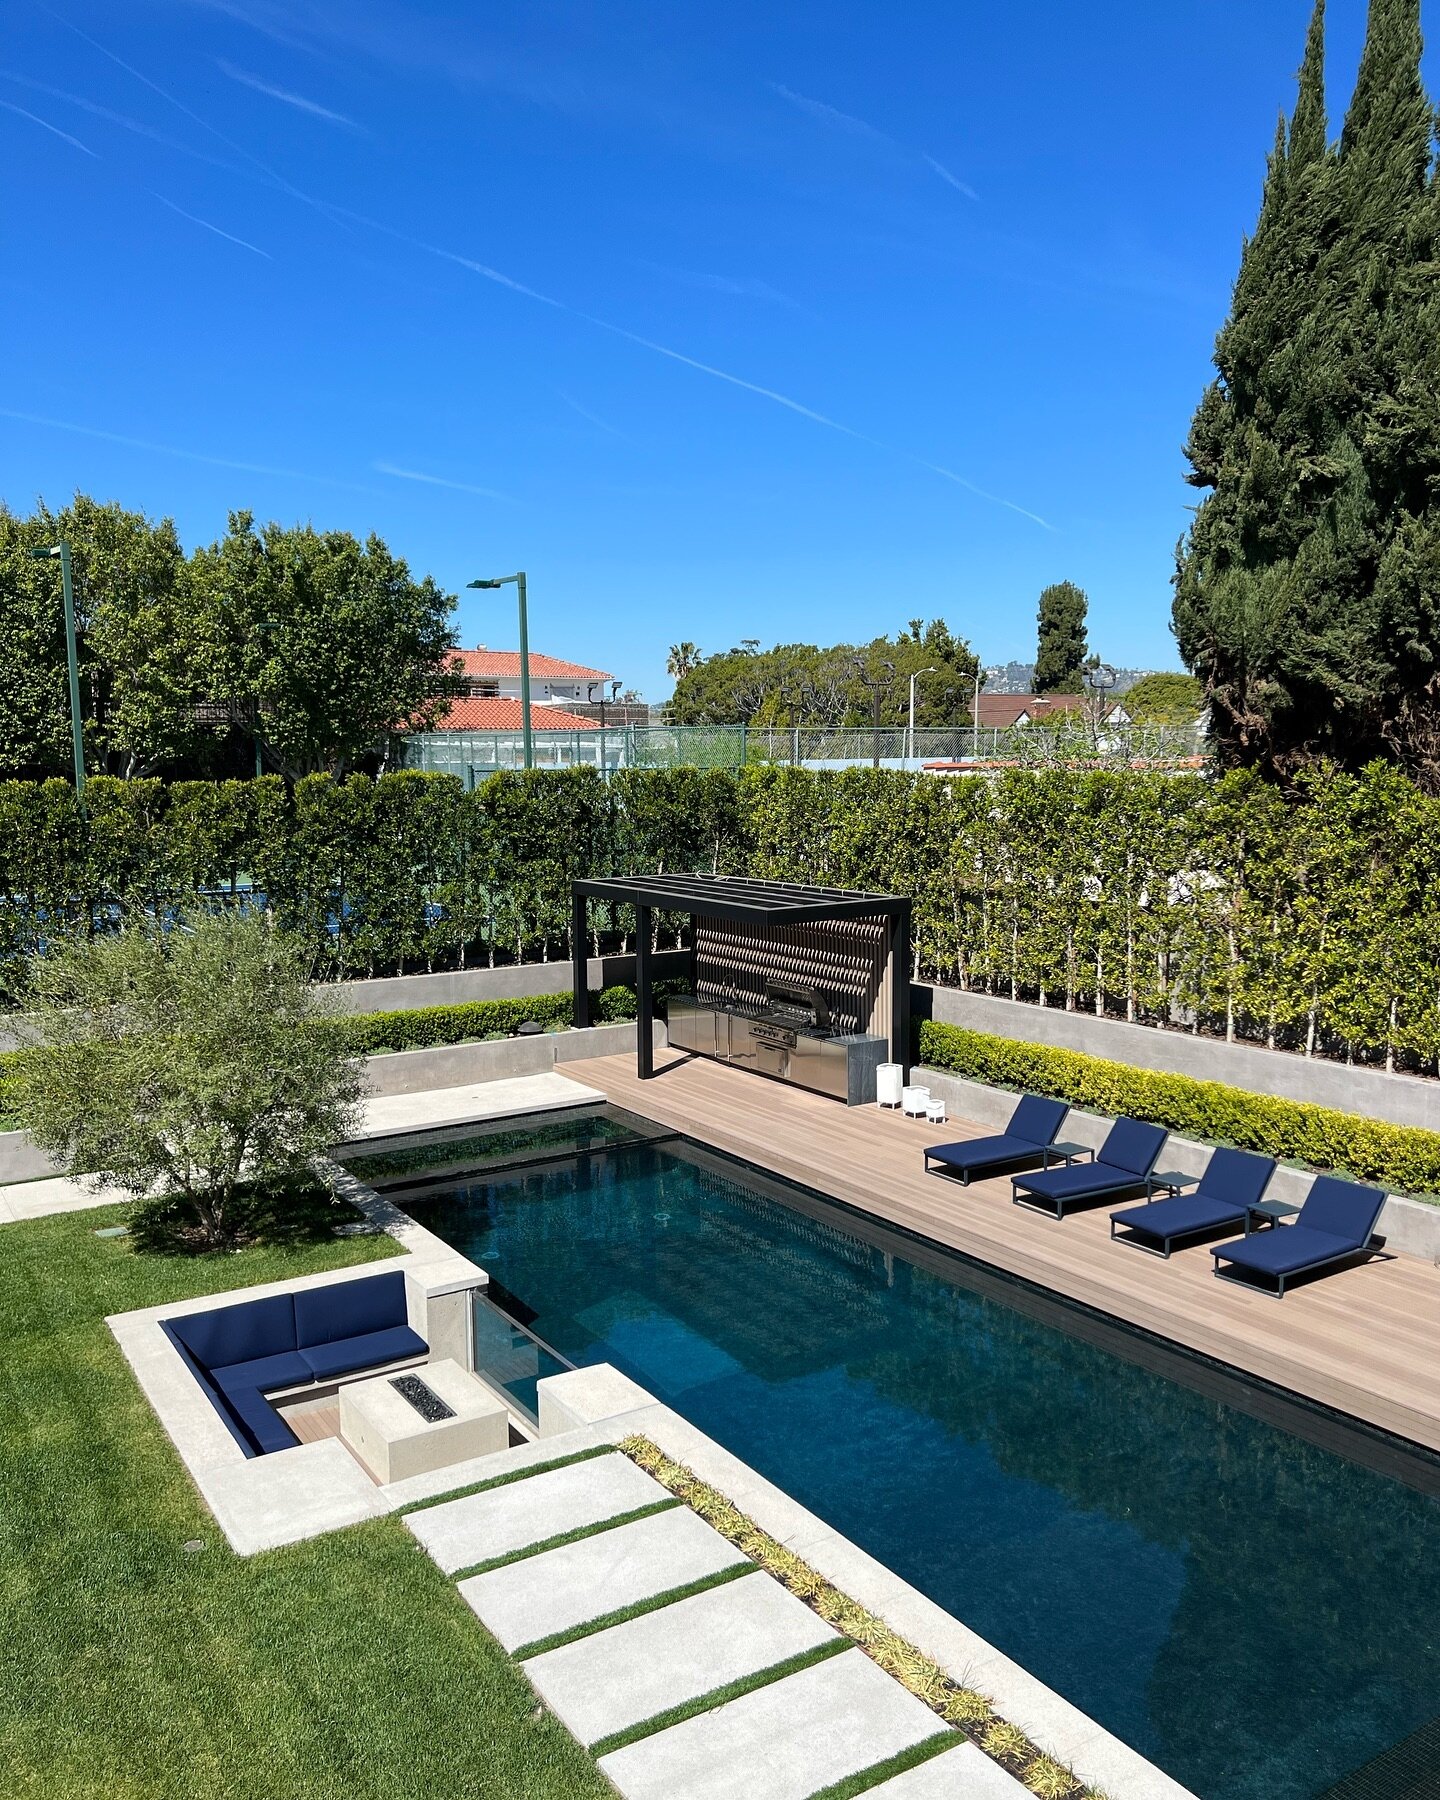 Does this backyard feel like a dream come true? Imagine lounging by the pool with your favorite book, the gentle breeze whispering through the trees, or hosting a vibrant evening of entertainment under the stars, where laughter echoes and memories ar